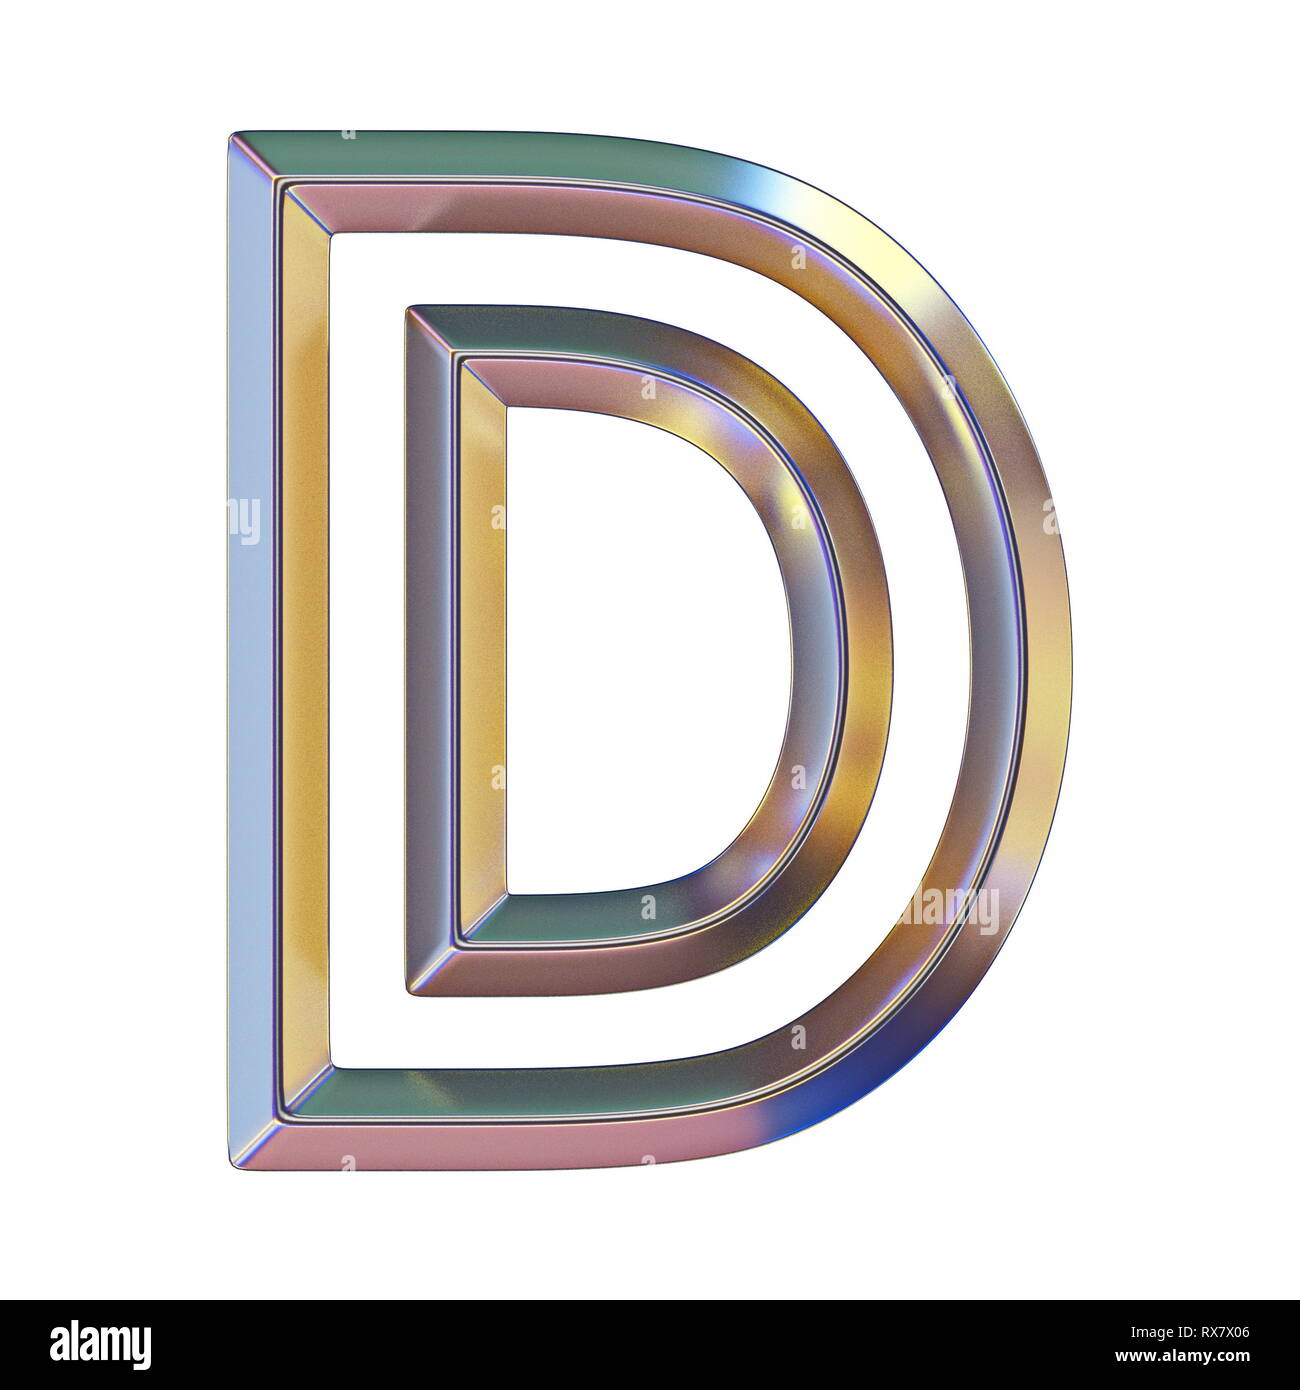 Chrome font with colorful reflections Letter D 3D render illustration isolated on white background Stock Photo